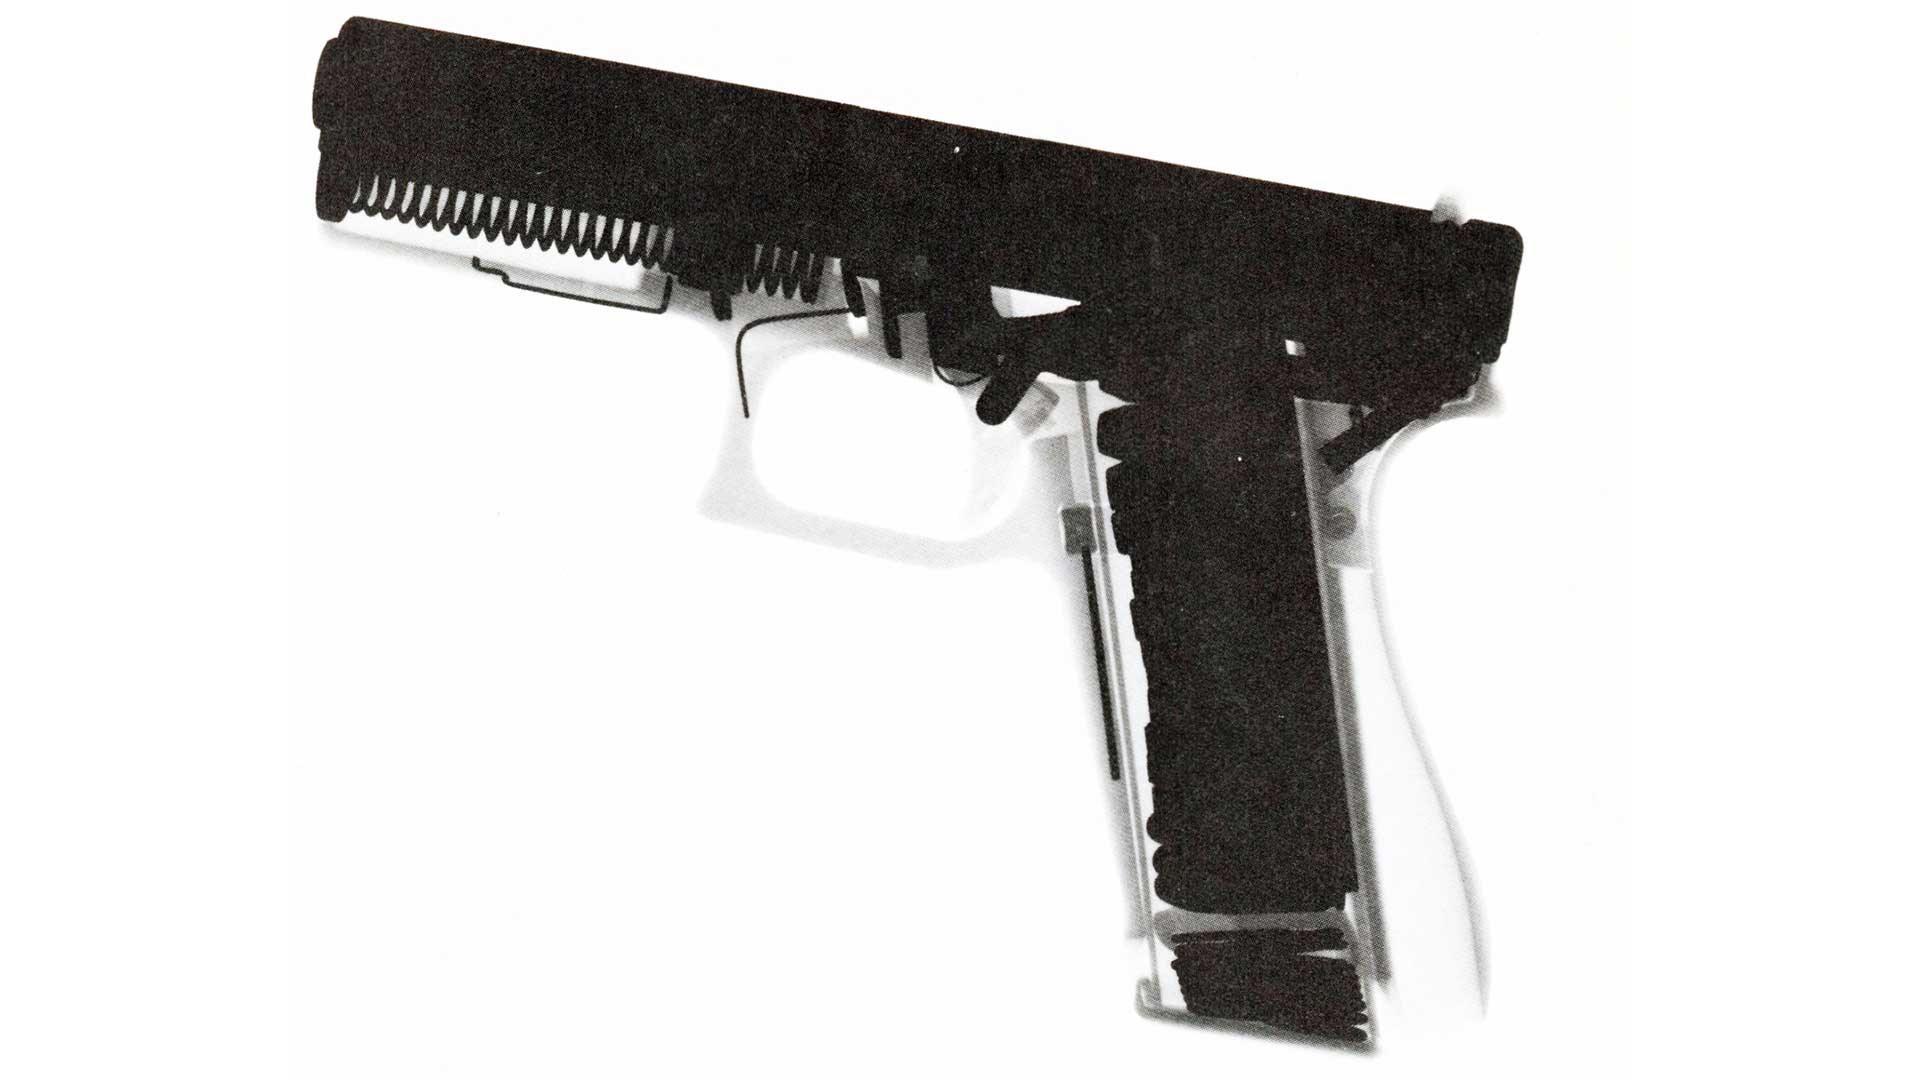 An X-ray image of a Glock 17 pistol.